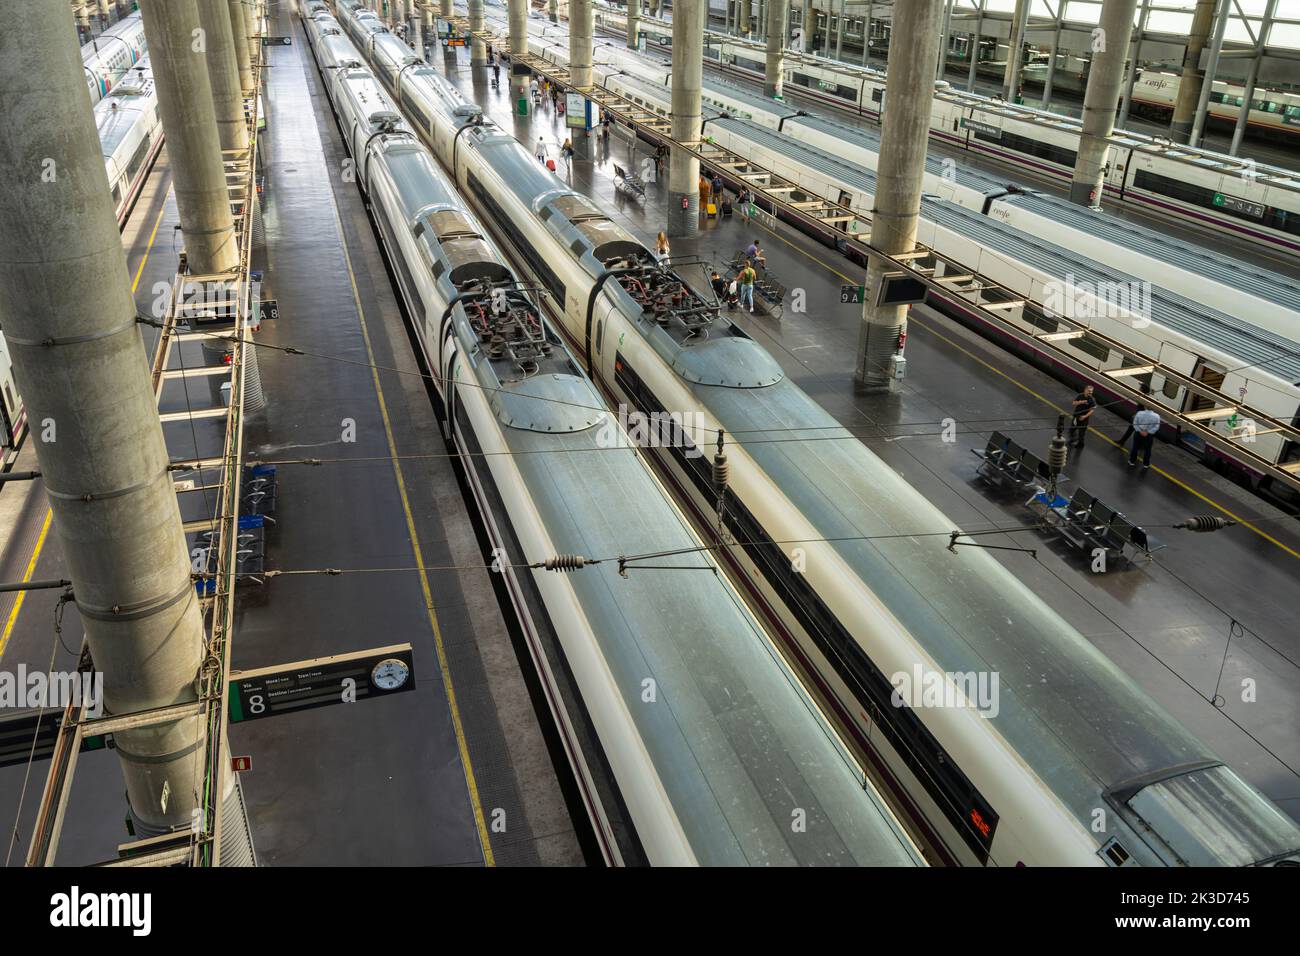 Madrid, Spain, September 2022. Panoramic view of the trains on the Atocha railway station platforms in the city center Stock Photo